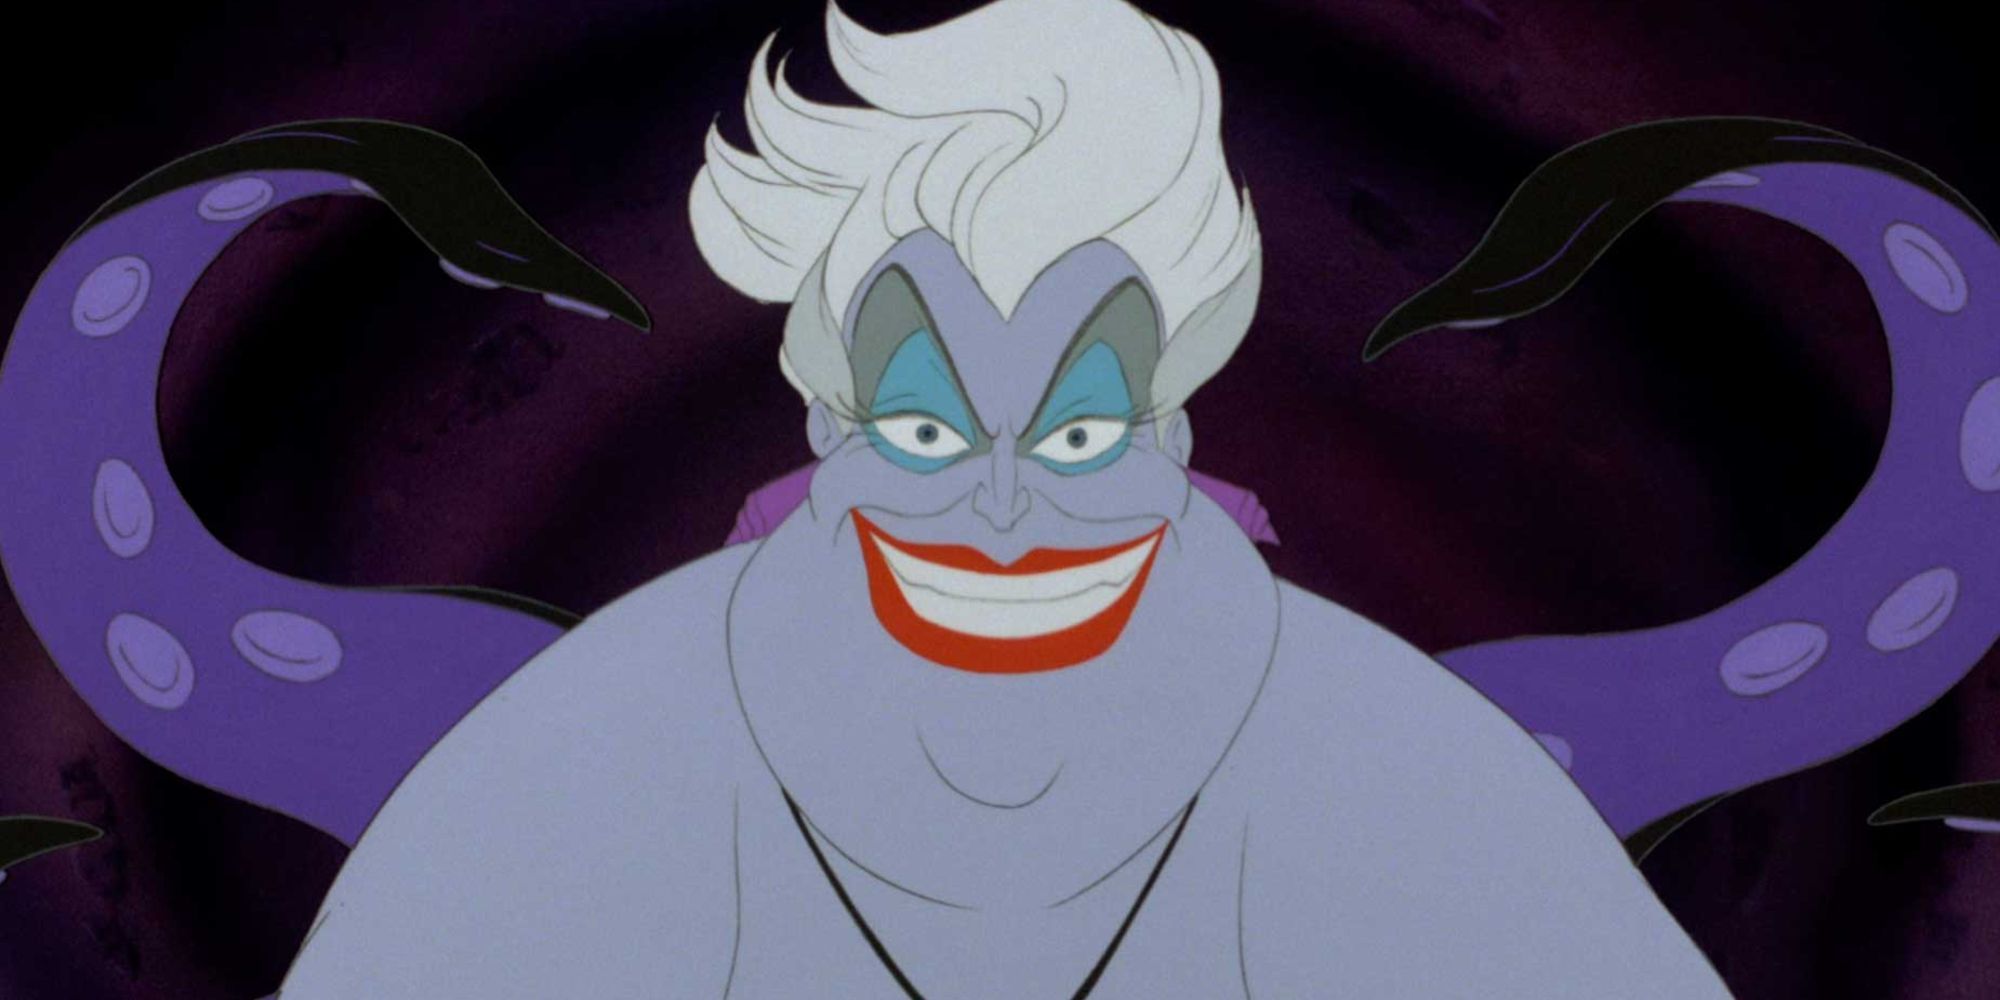 Emma Stone Says The Little Mermaid’s Ursula Should Get Her Own Movie